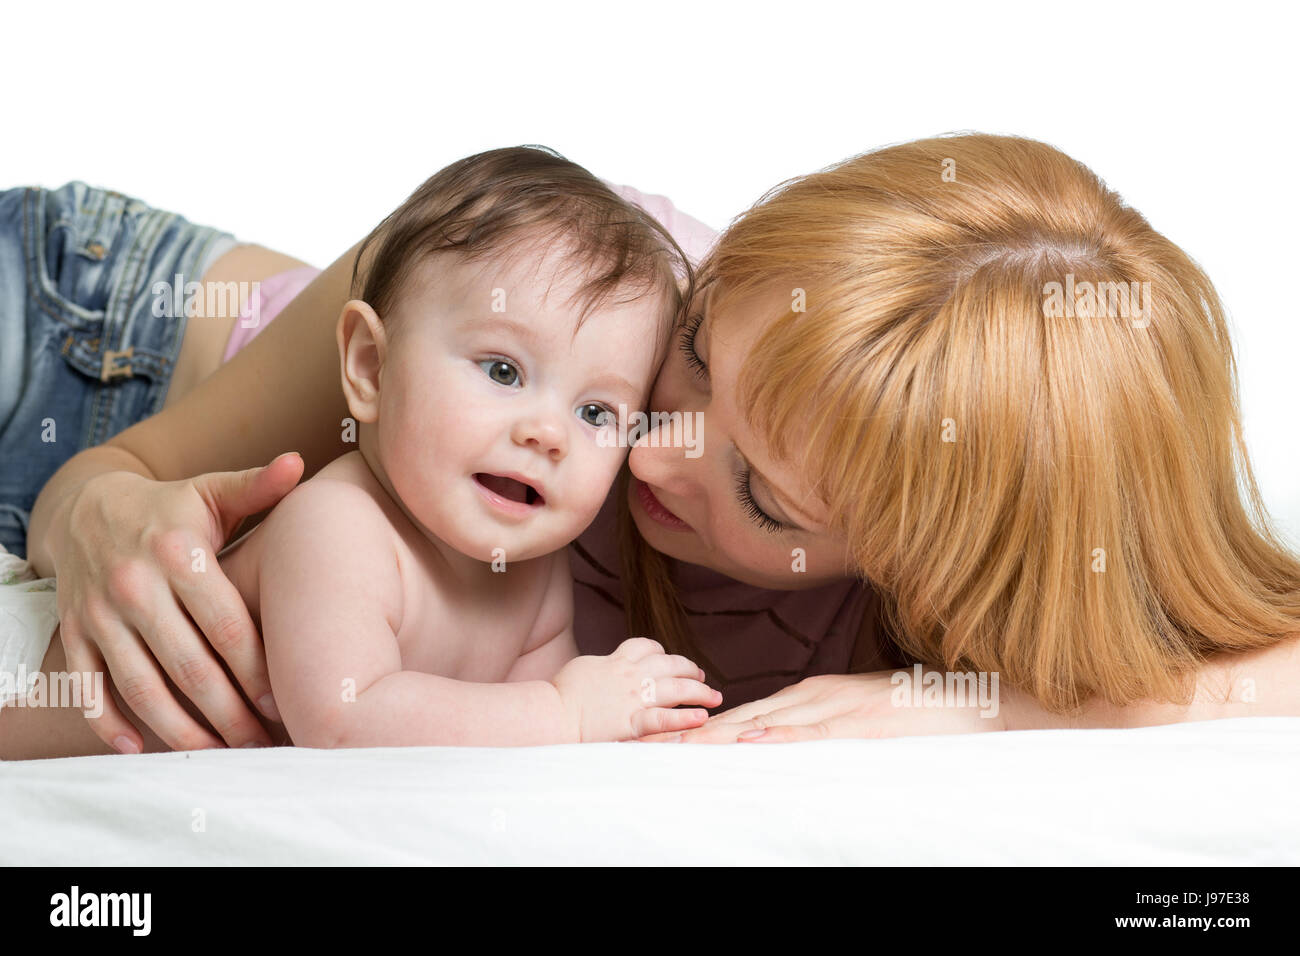 Cute mother embraces her little baby. Woman and newborn kid boy relax in a white bedroom. Stock Photo